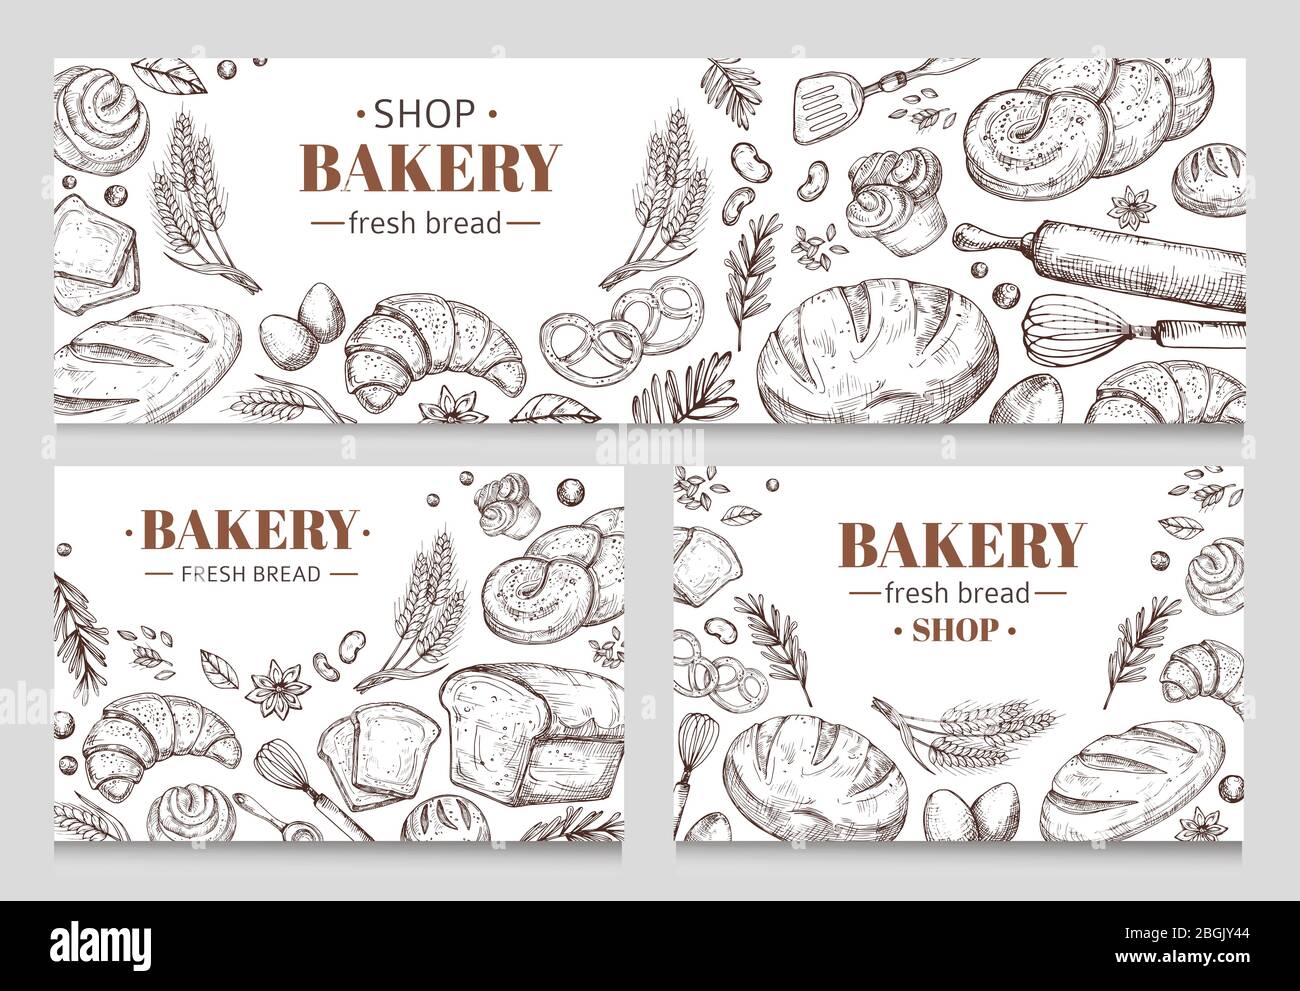 Vintage bakery banners with sketched bread vector set. Illustration of bakery card sketched, food bun for breakfast Stock Vector